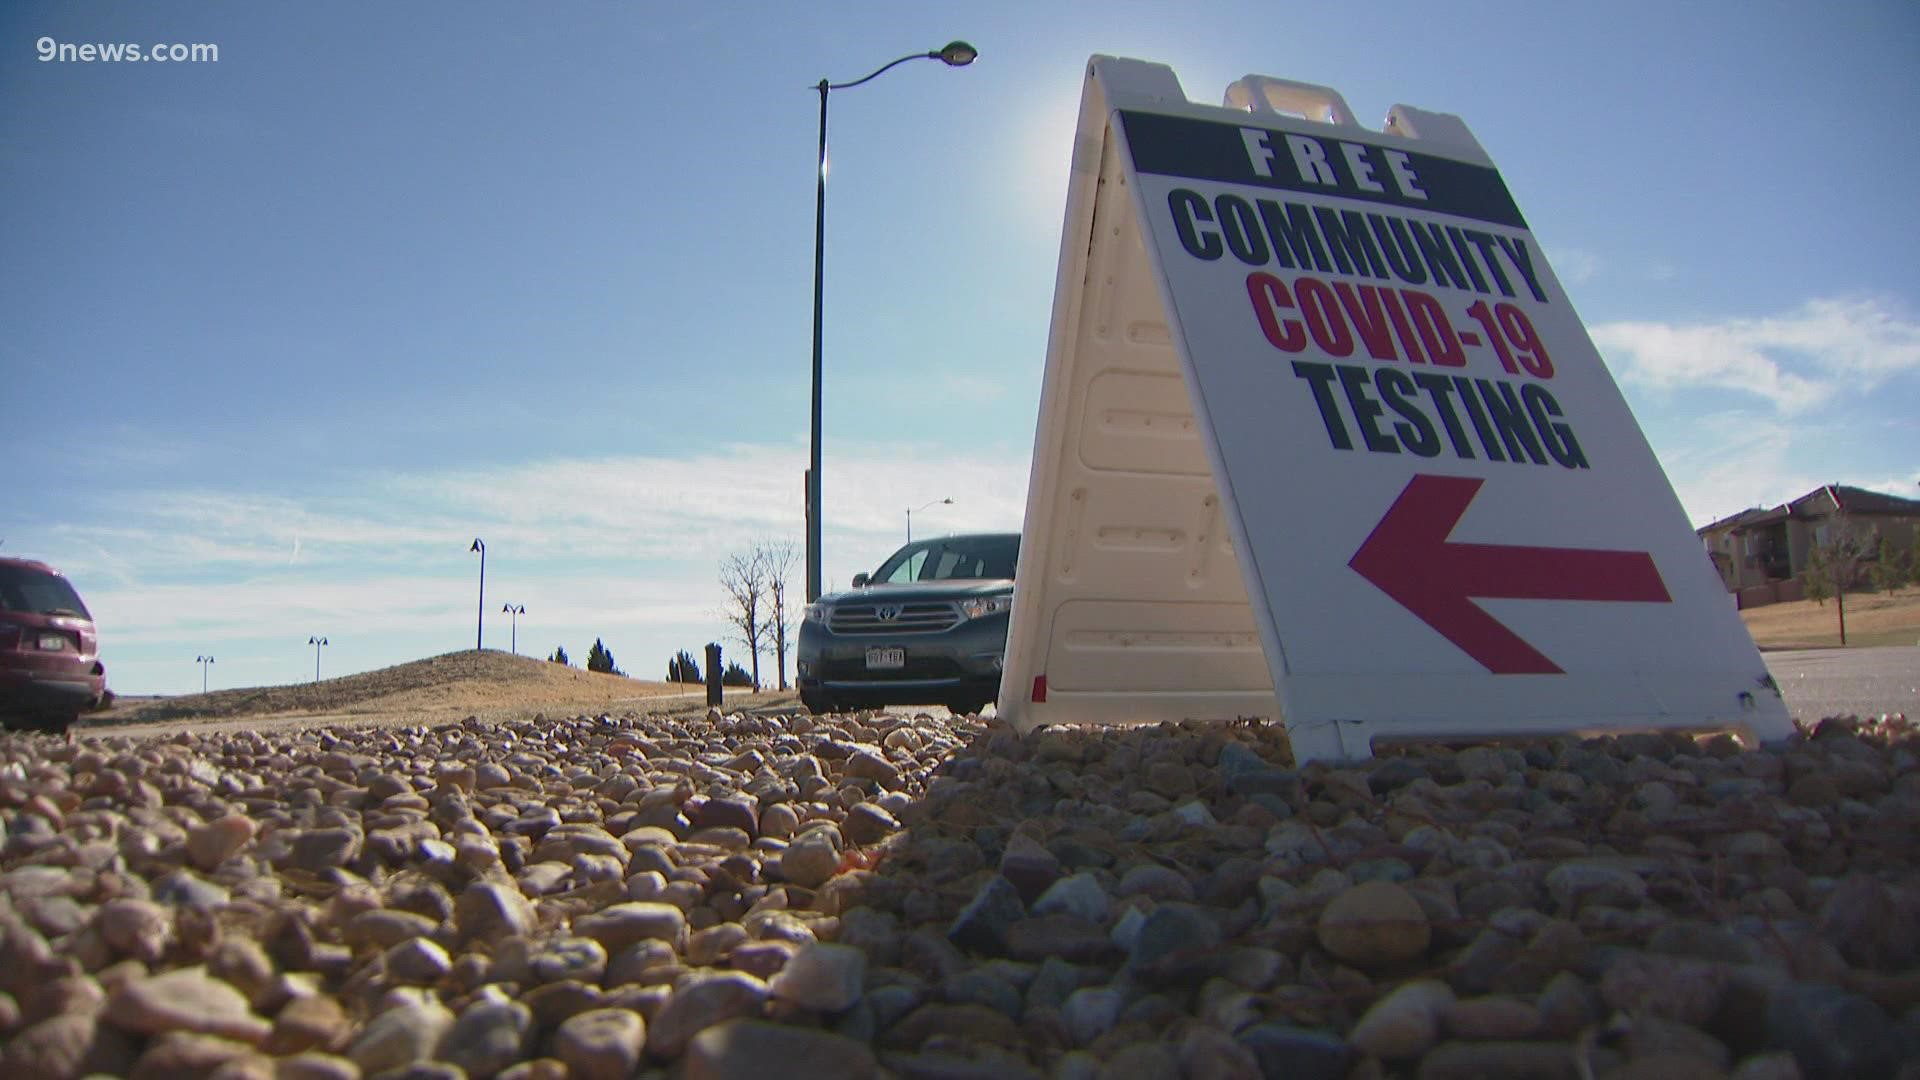 The holiday rush is not over when it comes to demand for COVID tests in Colorado. Long lines can be seen at testing sites from Boulder to Douglas County.